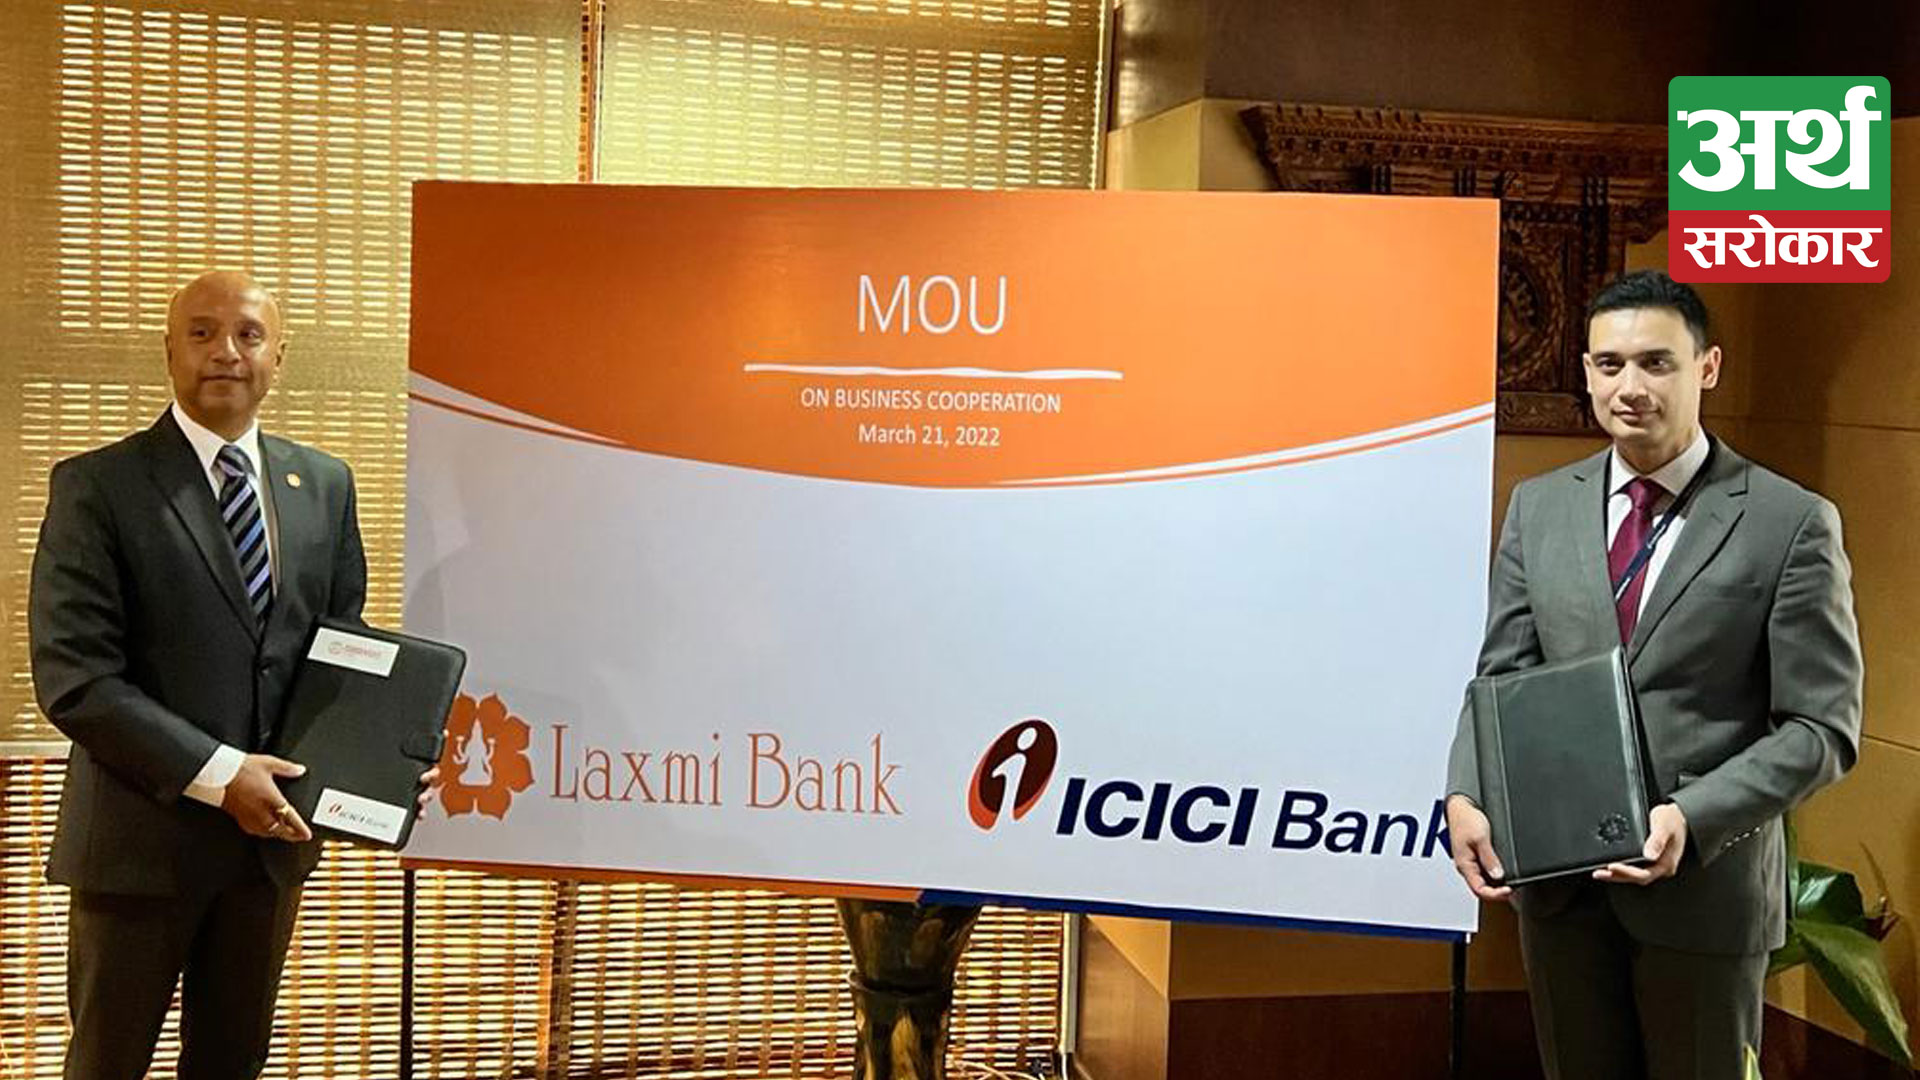 Laxmi Bank signs business cooperation MoU with ICICI Bank